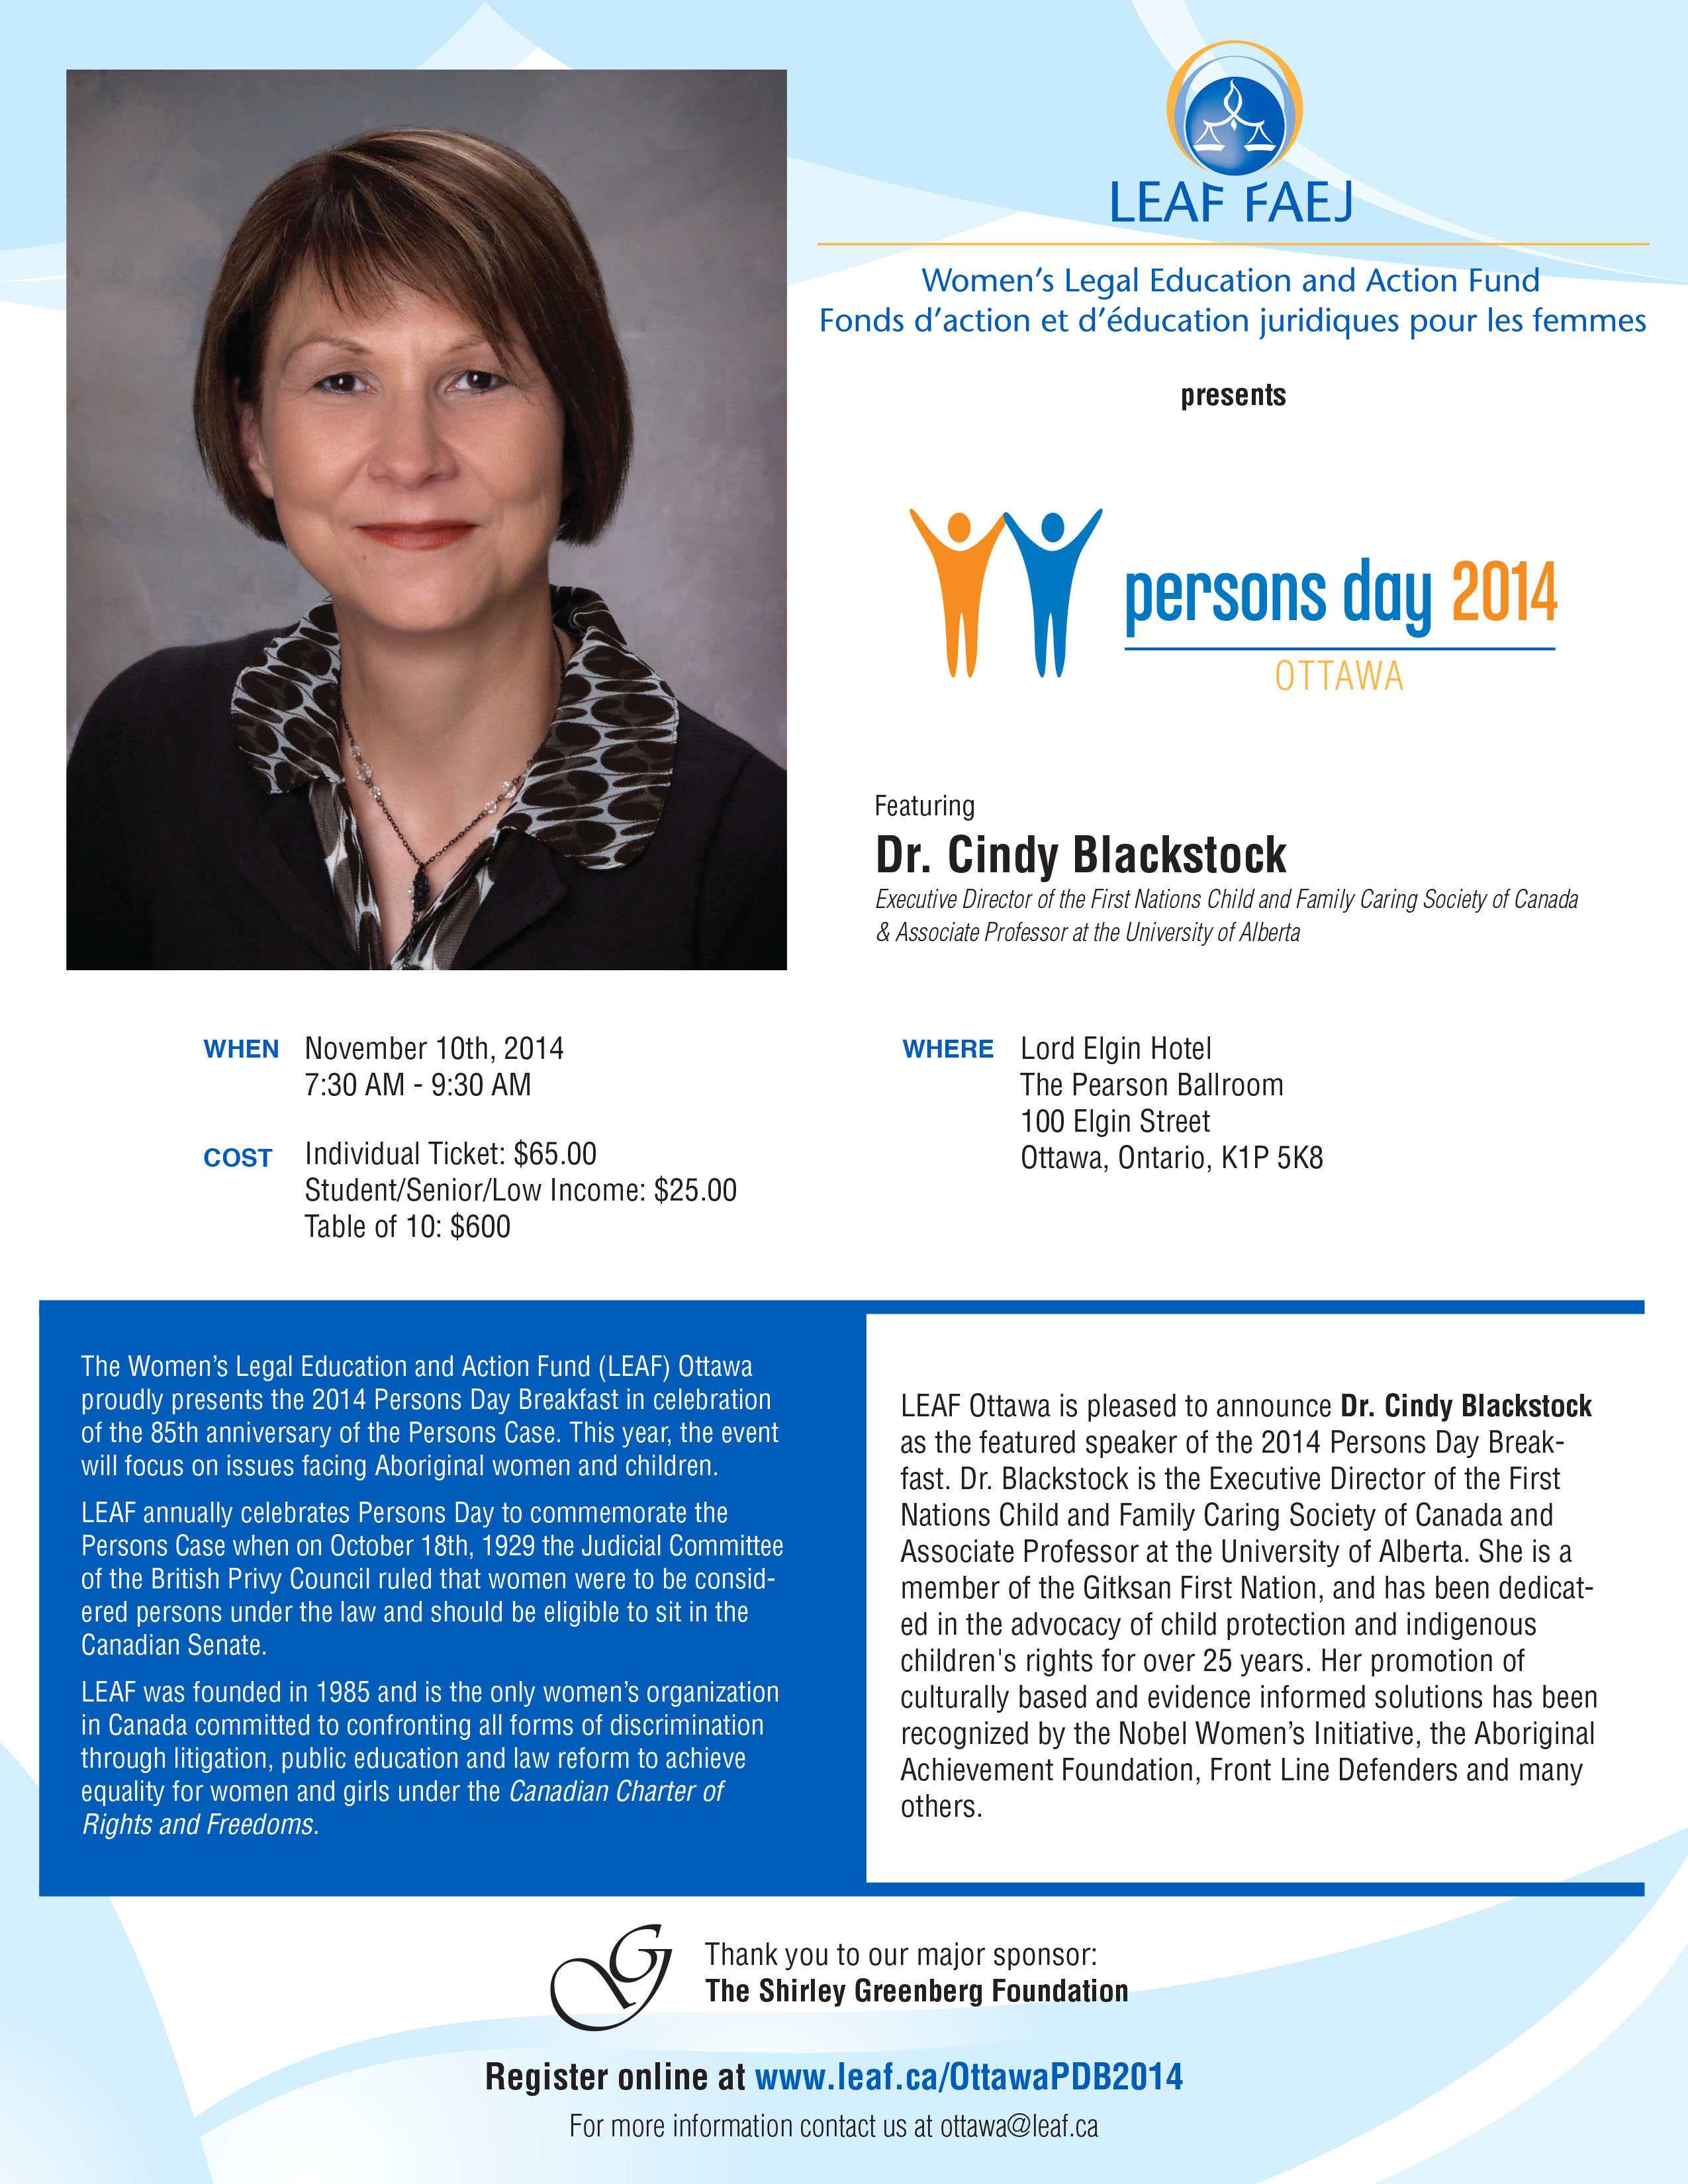 LEAF Ottawa proudly presents Persons Day Breakfast on November 10th ...